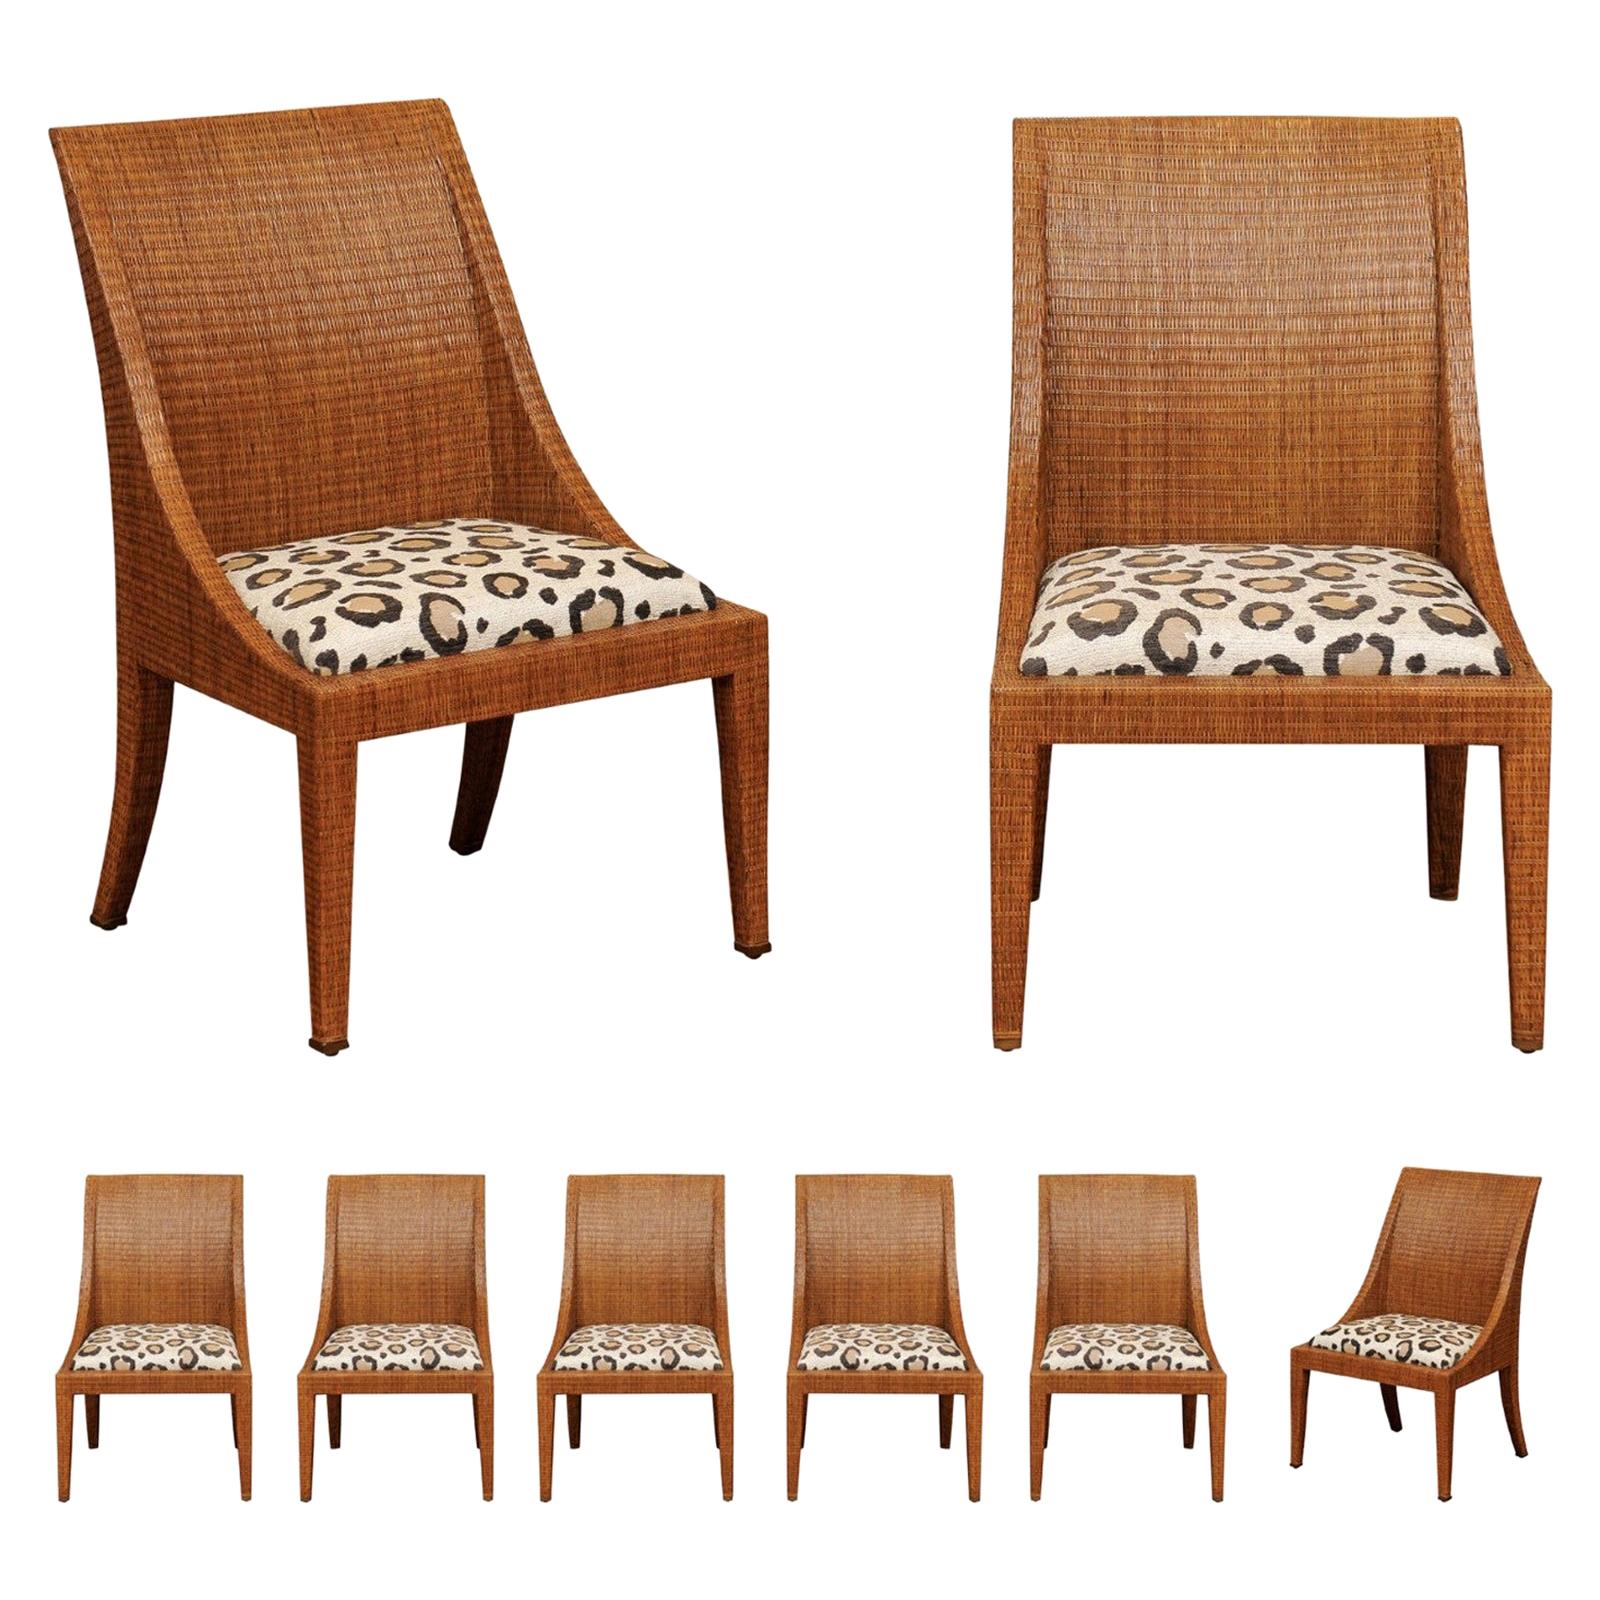 Elegant Restored Set of 10 Cane Dining Chairs by McGuire For Sale